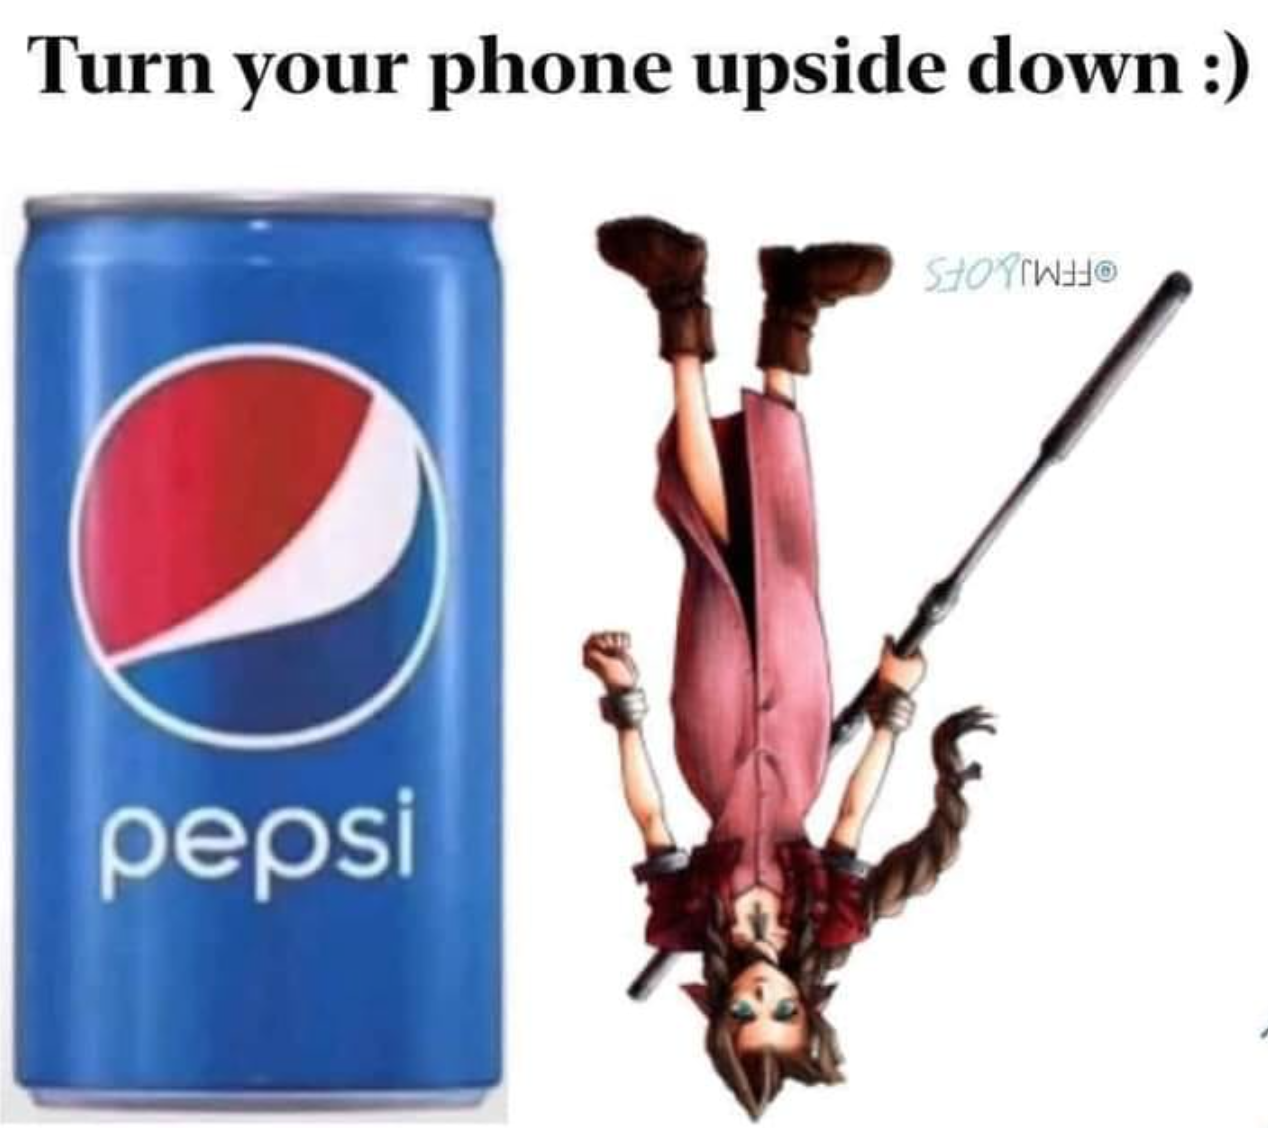 funny gaming memes - turn your phone upside down pepsi - Turn your phone upside down Sto W@ e pepsi